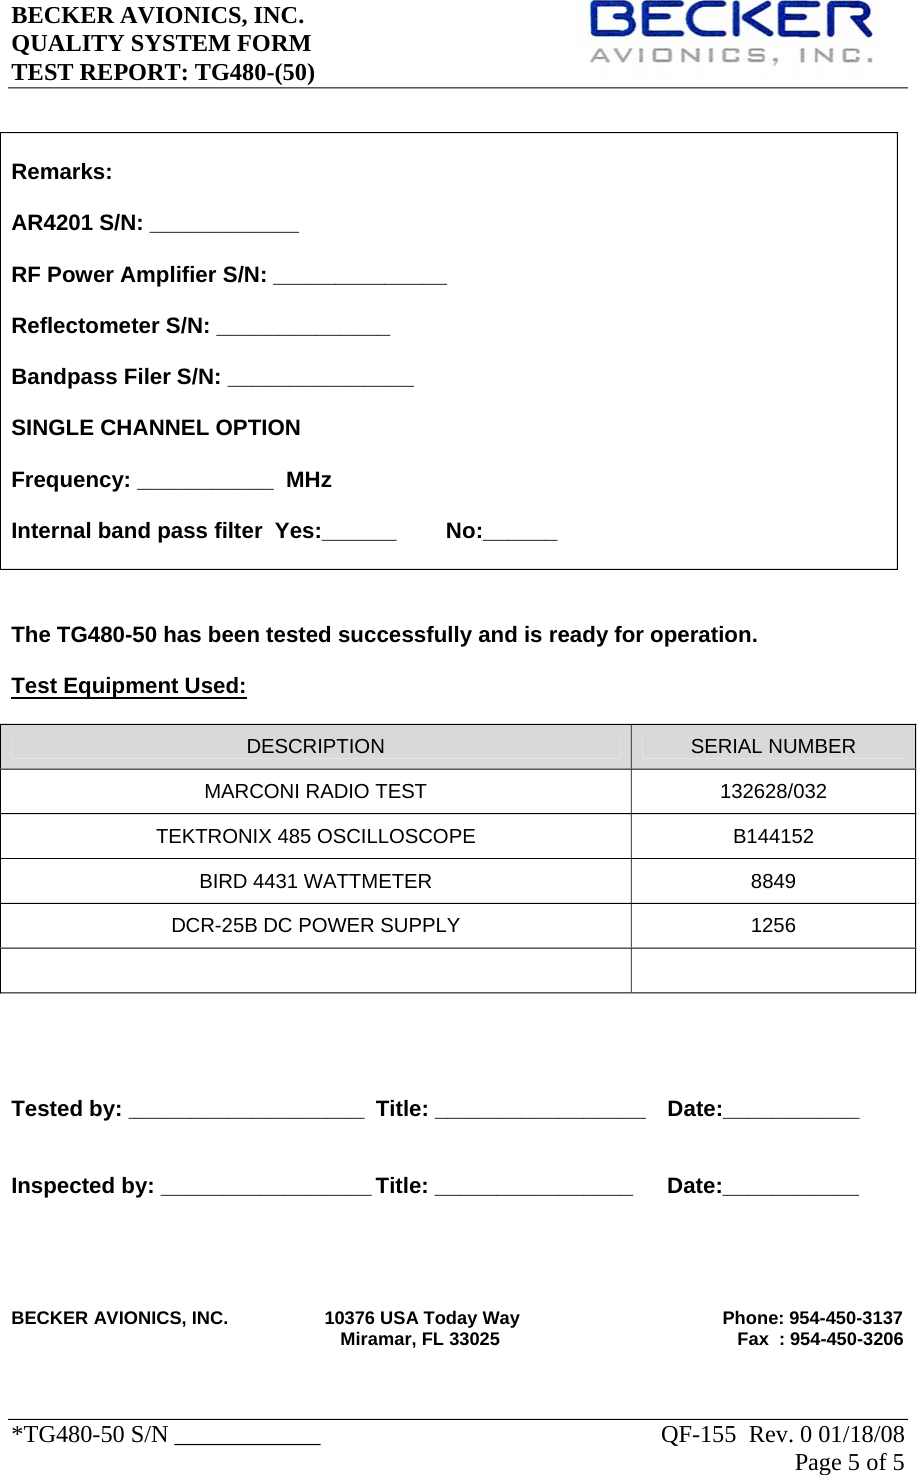 BECKER AVIONICS, INC.     QUALITY SYSTEM FORM TEST REPORT: TG480-(50)   *TG480-50 S/N ____________    QF-155  Rev. 0 01/18/08 Page 5 of 5      The TG480-50 has been tested successfully and is ready for operation.  Test Equipment Used: DESCRIPTION  SERIAL NUMBER MARCONI RADIO TEST  132628/032 TEKTRONIX 485 OSCILLOSCOPE  B144152 BIRD 4431 WATTMETER  8849 DCR-25B DC POWER SUPPLY  1256        Tested by: ___________________  Title: _________________  Date:___________   Inspected by: _________________ Title: ________________   Date:___________      BECKER AVIONICS, INC.                   10376 USA Today Way                                        Phone: 954-450-3137                                                                  Miramar, FL 33025                                               Fax  : 954-450-3206   Remarks:  AR4201 S/N: ____________  RF Power Amplifier S/N: ______________  Reflectometer S/N: ______________  Bandpass Filer S/N: _______________  SINGLE CHANNEL OPTION   Frequency: ___________  MHz    Internal band pass filter  Yes:______        No:______  